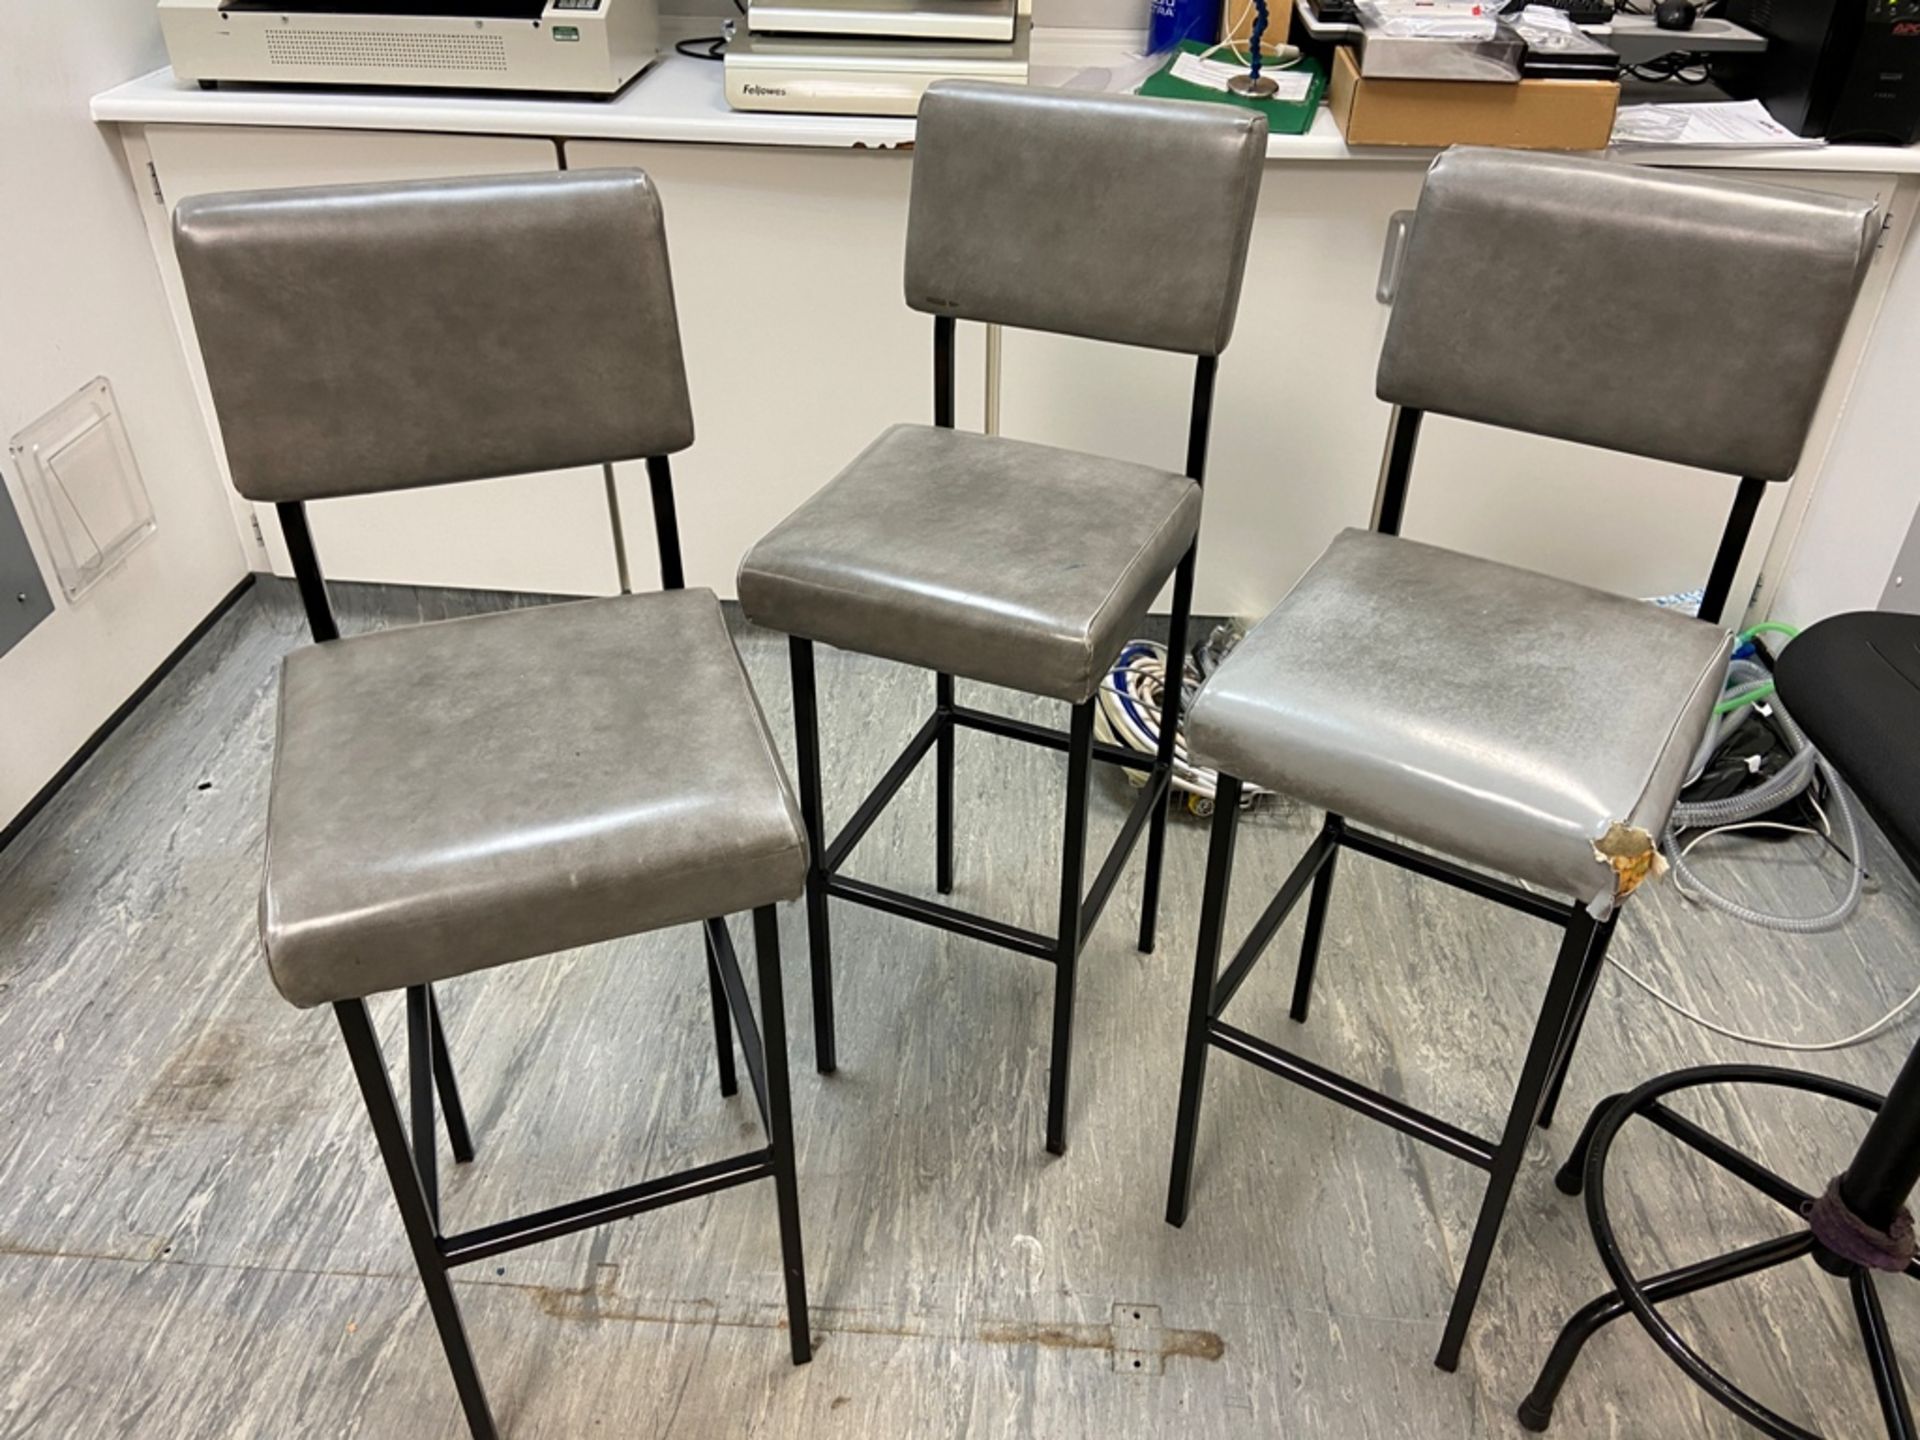 Six leather stools, 3x No. fitted and 3x No. adjustable - Image 3 of 3